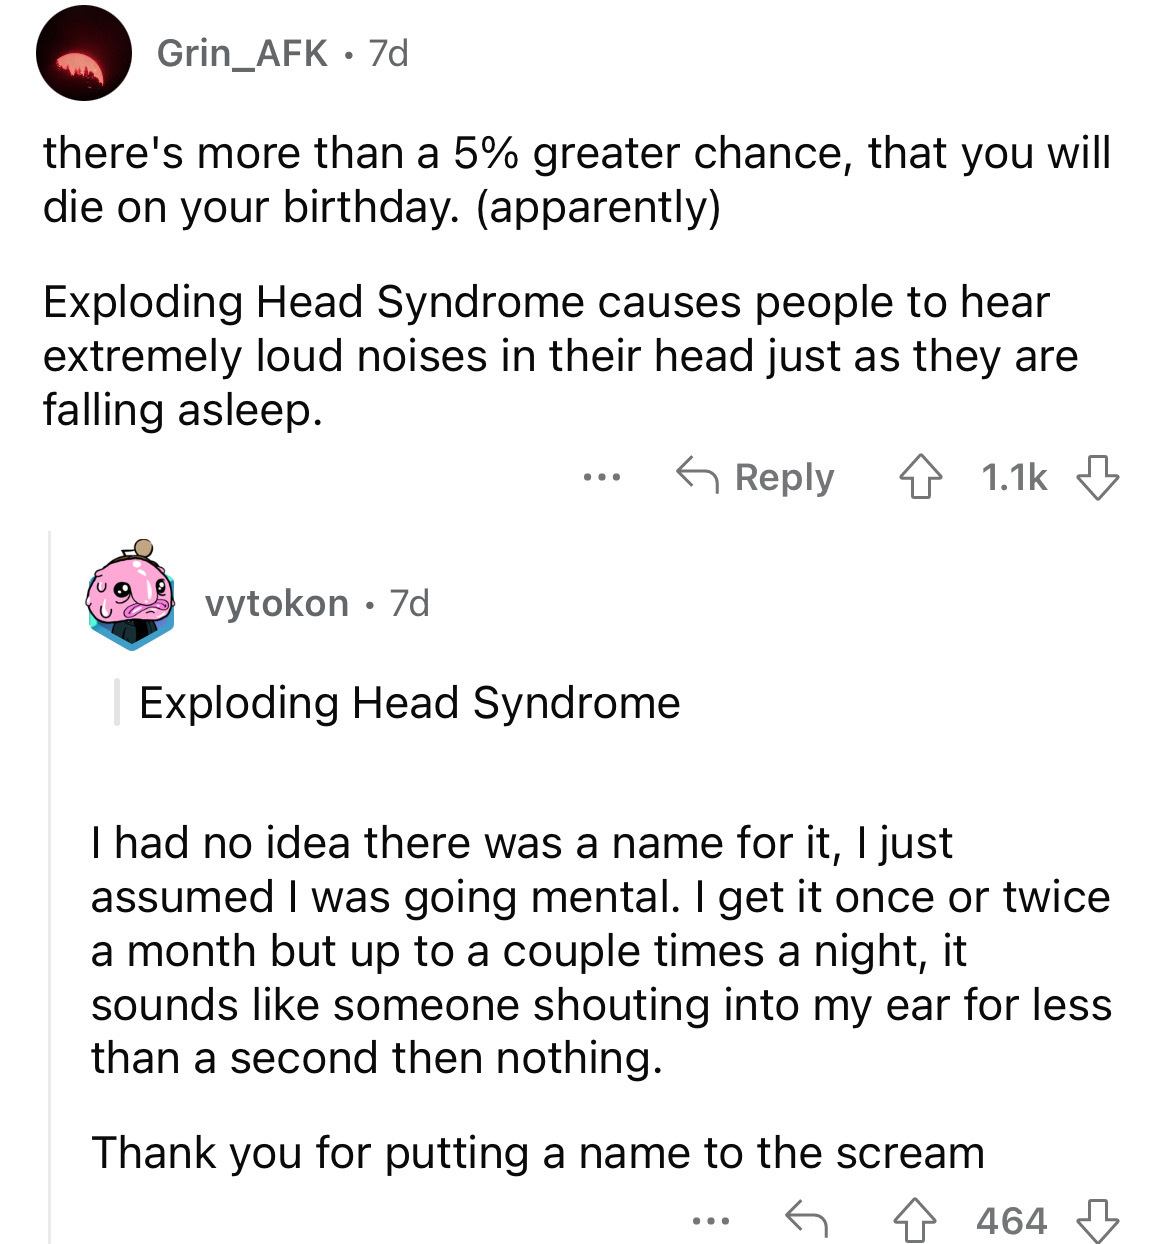 angle - Grin_AFK 7d there's more than a 5% greater chance, that you will die on your birthday. apparently Exploding Head Syndrome causes people to hear extremely loud noises in their head just as they are falling asleep. vytokon 7d Exploding Head Syndrome